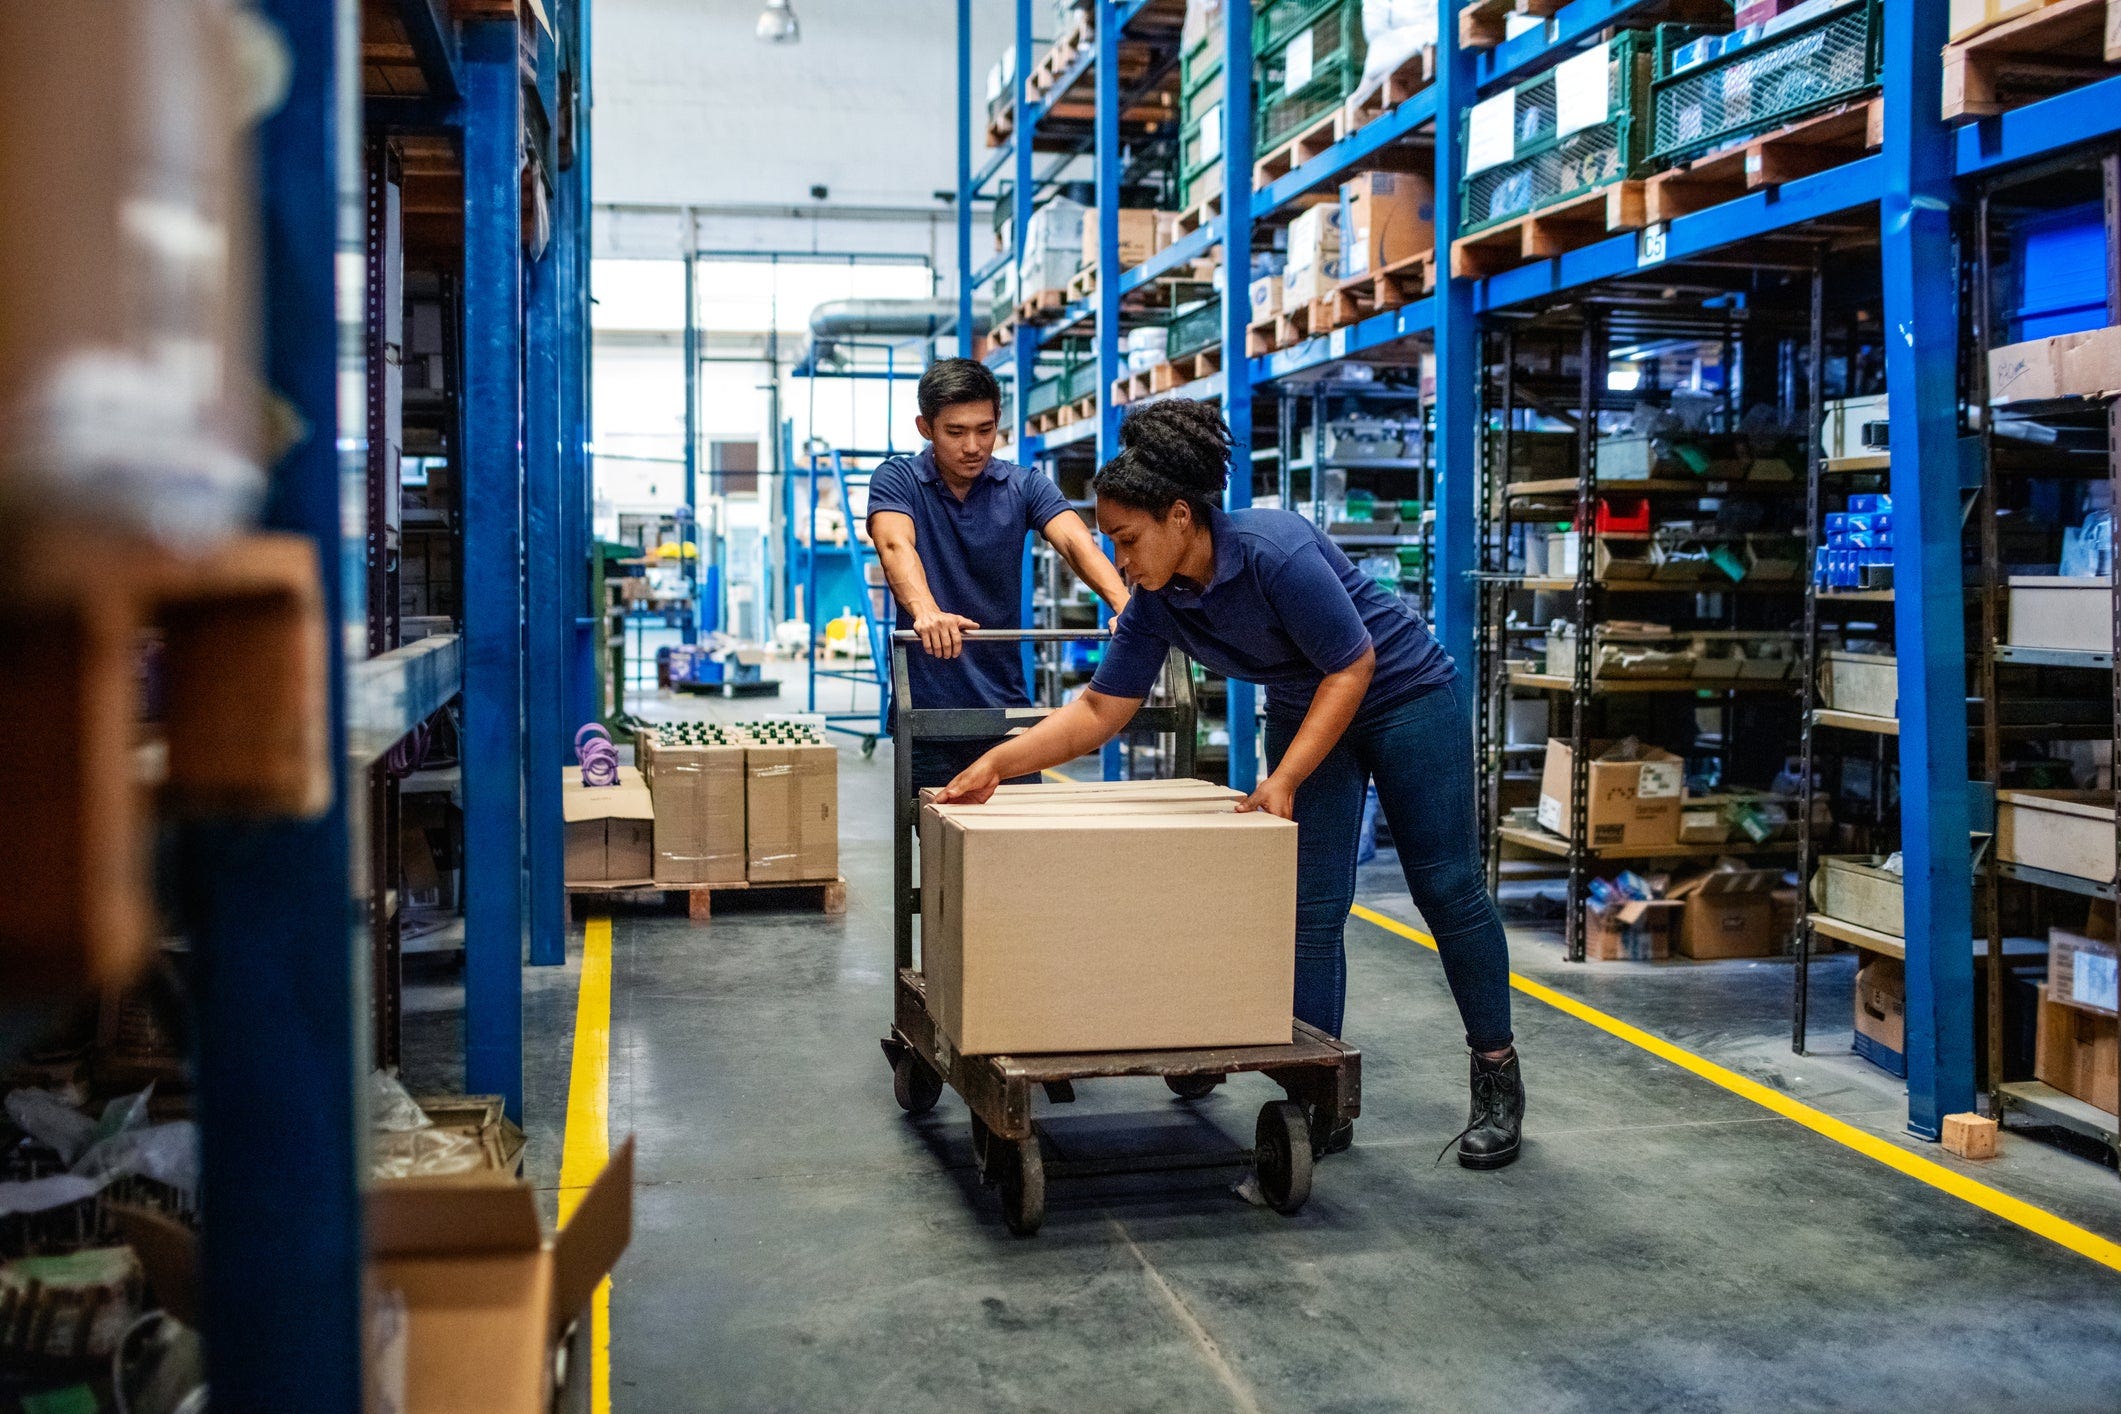 Warehouse Workers Needed in the USA